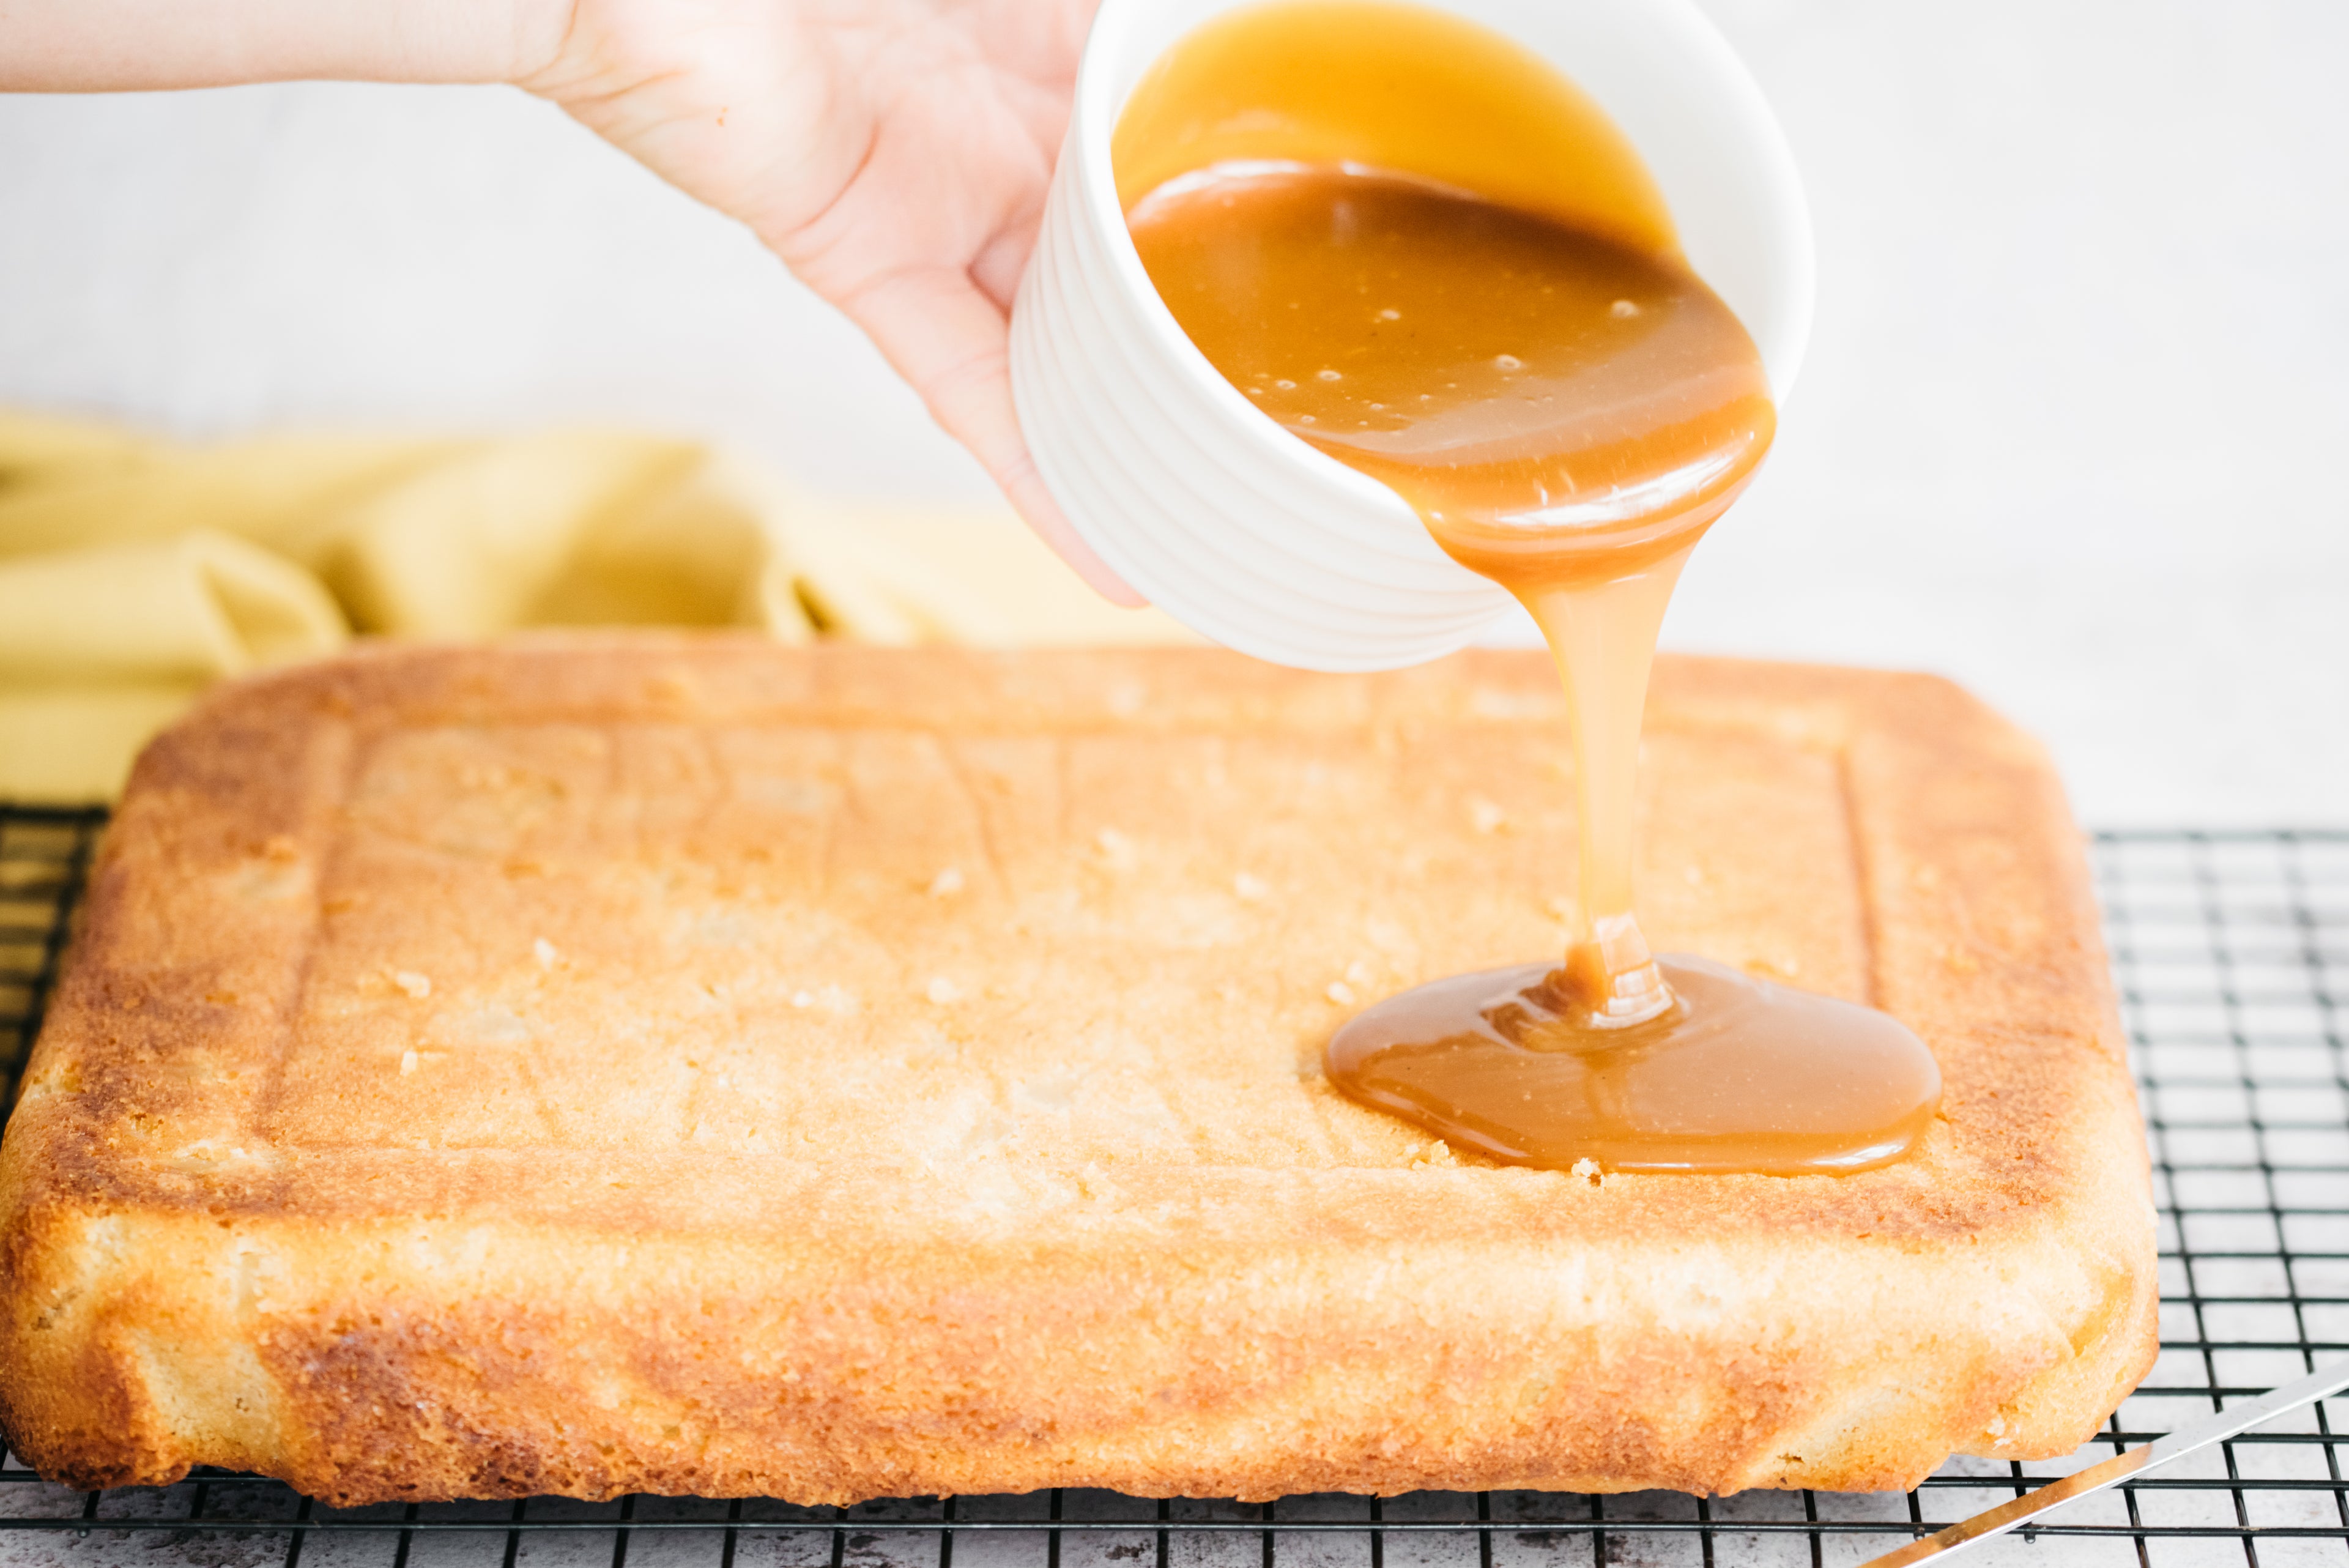 Pouring caramel sauce on top of cake